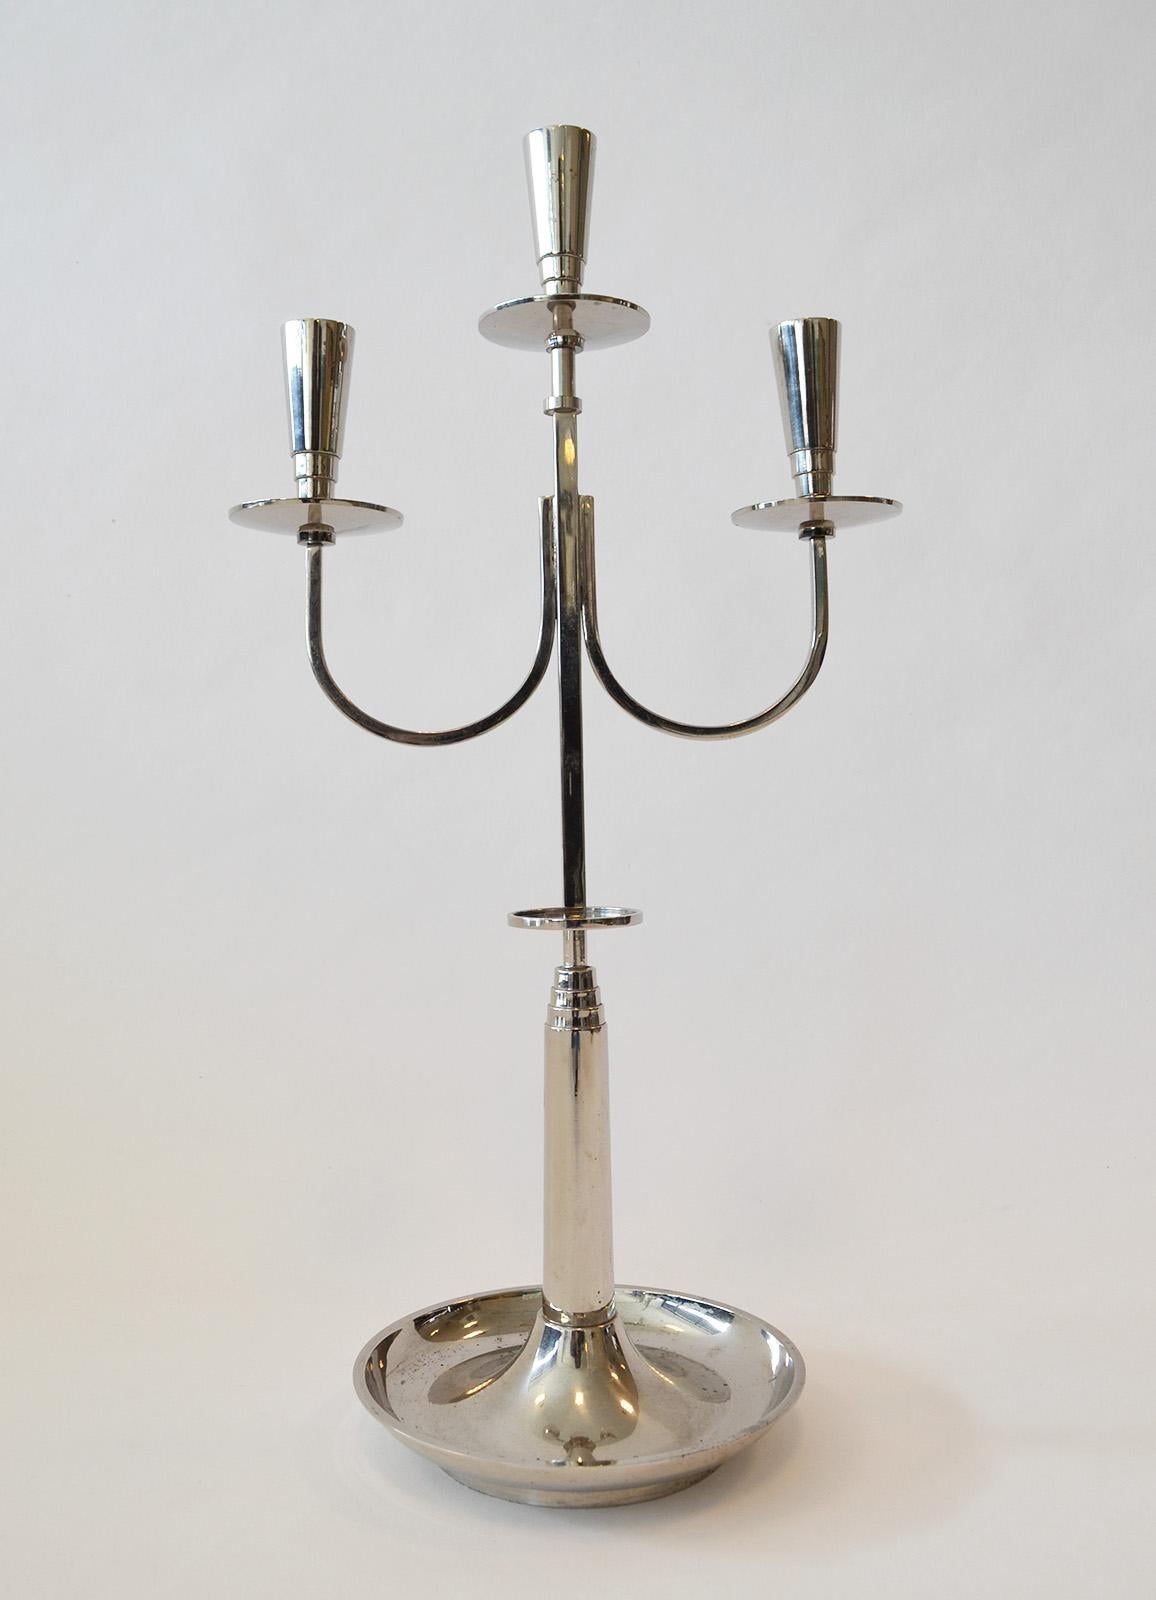 Tommi Parzinger Candlestick Candelabra
Trident form, art deco lines and geometry. Silver plate over brass. Unsigned. 